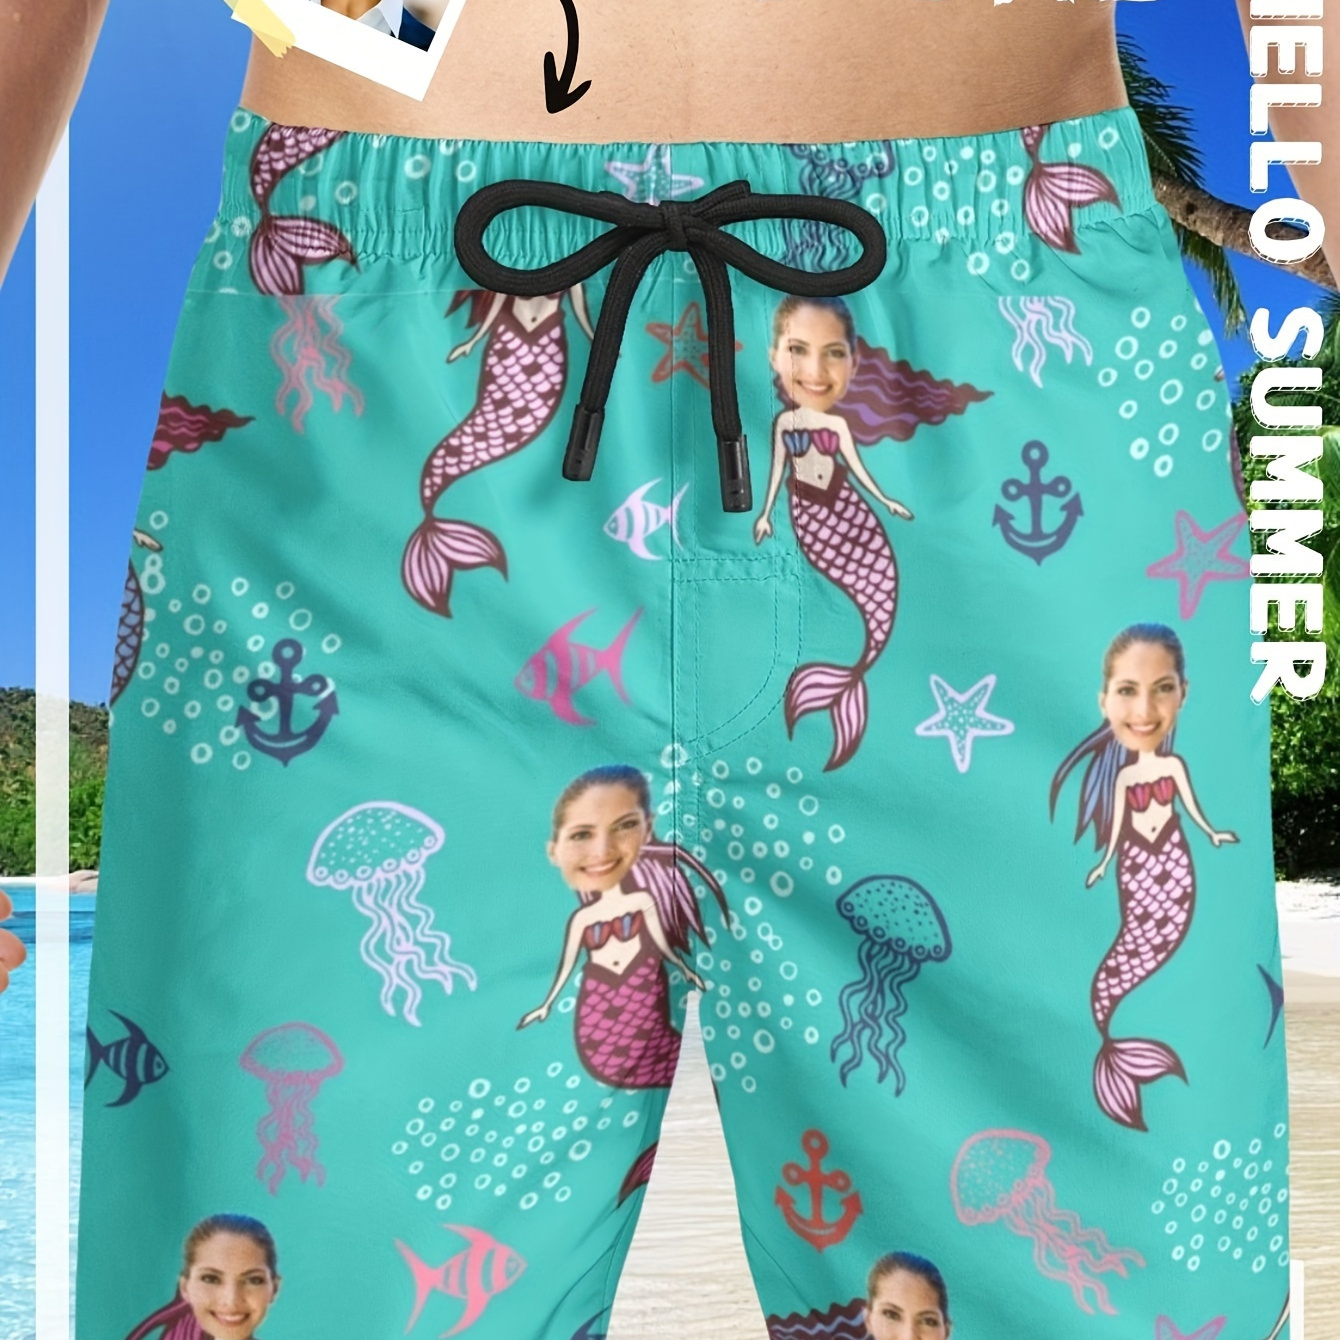 

Men's Customized Portrait Photo Print, Mermaid And Marine Animals Pattern Shorts With Drawstring, Casual And Chic Shorts For Summer Beach Vacation And Leisurewear